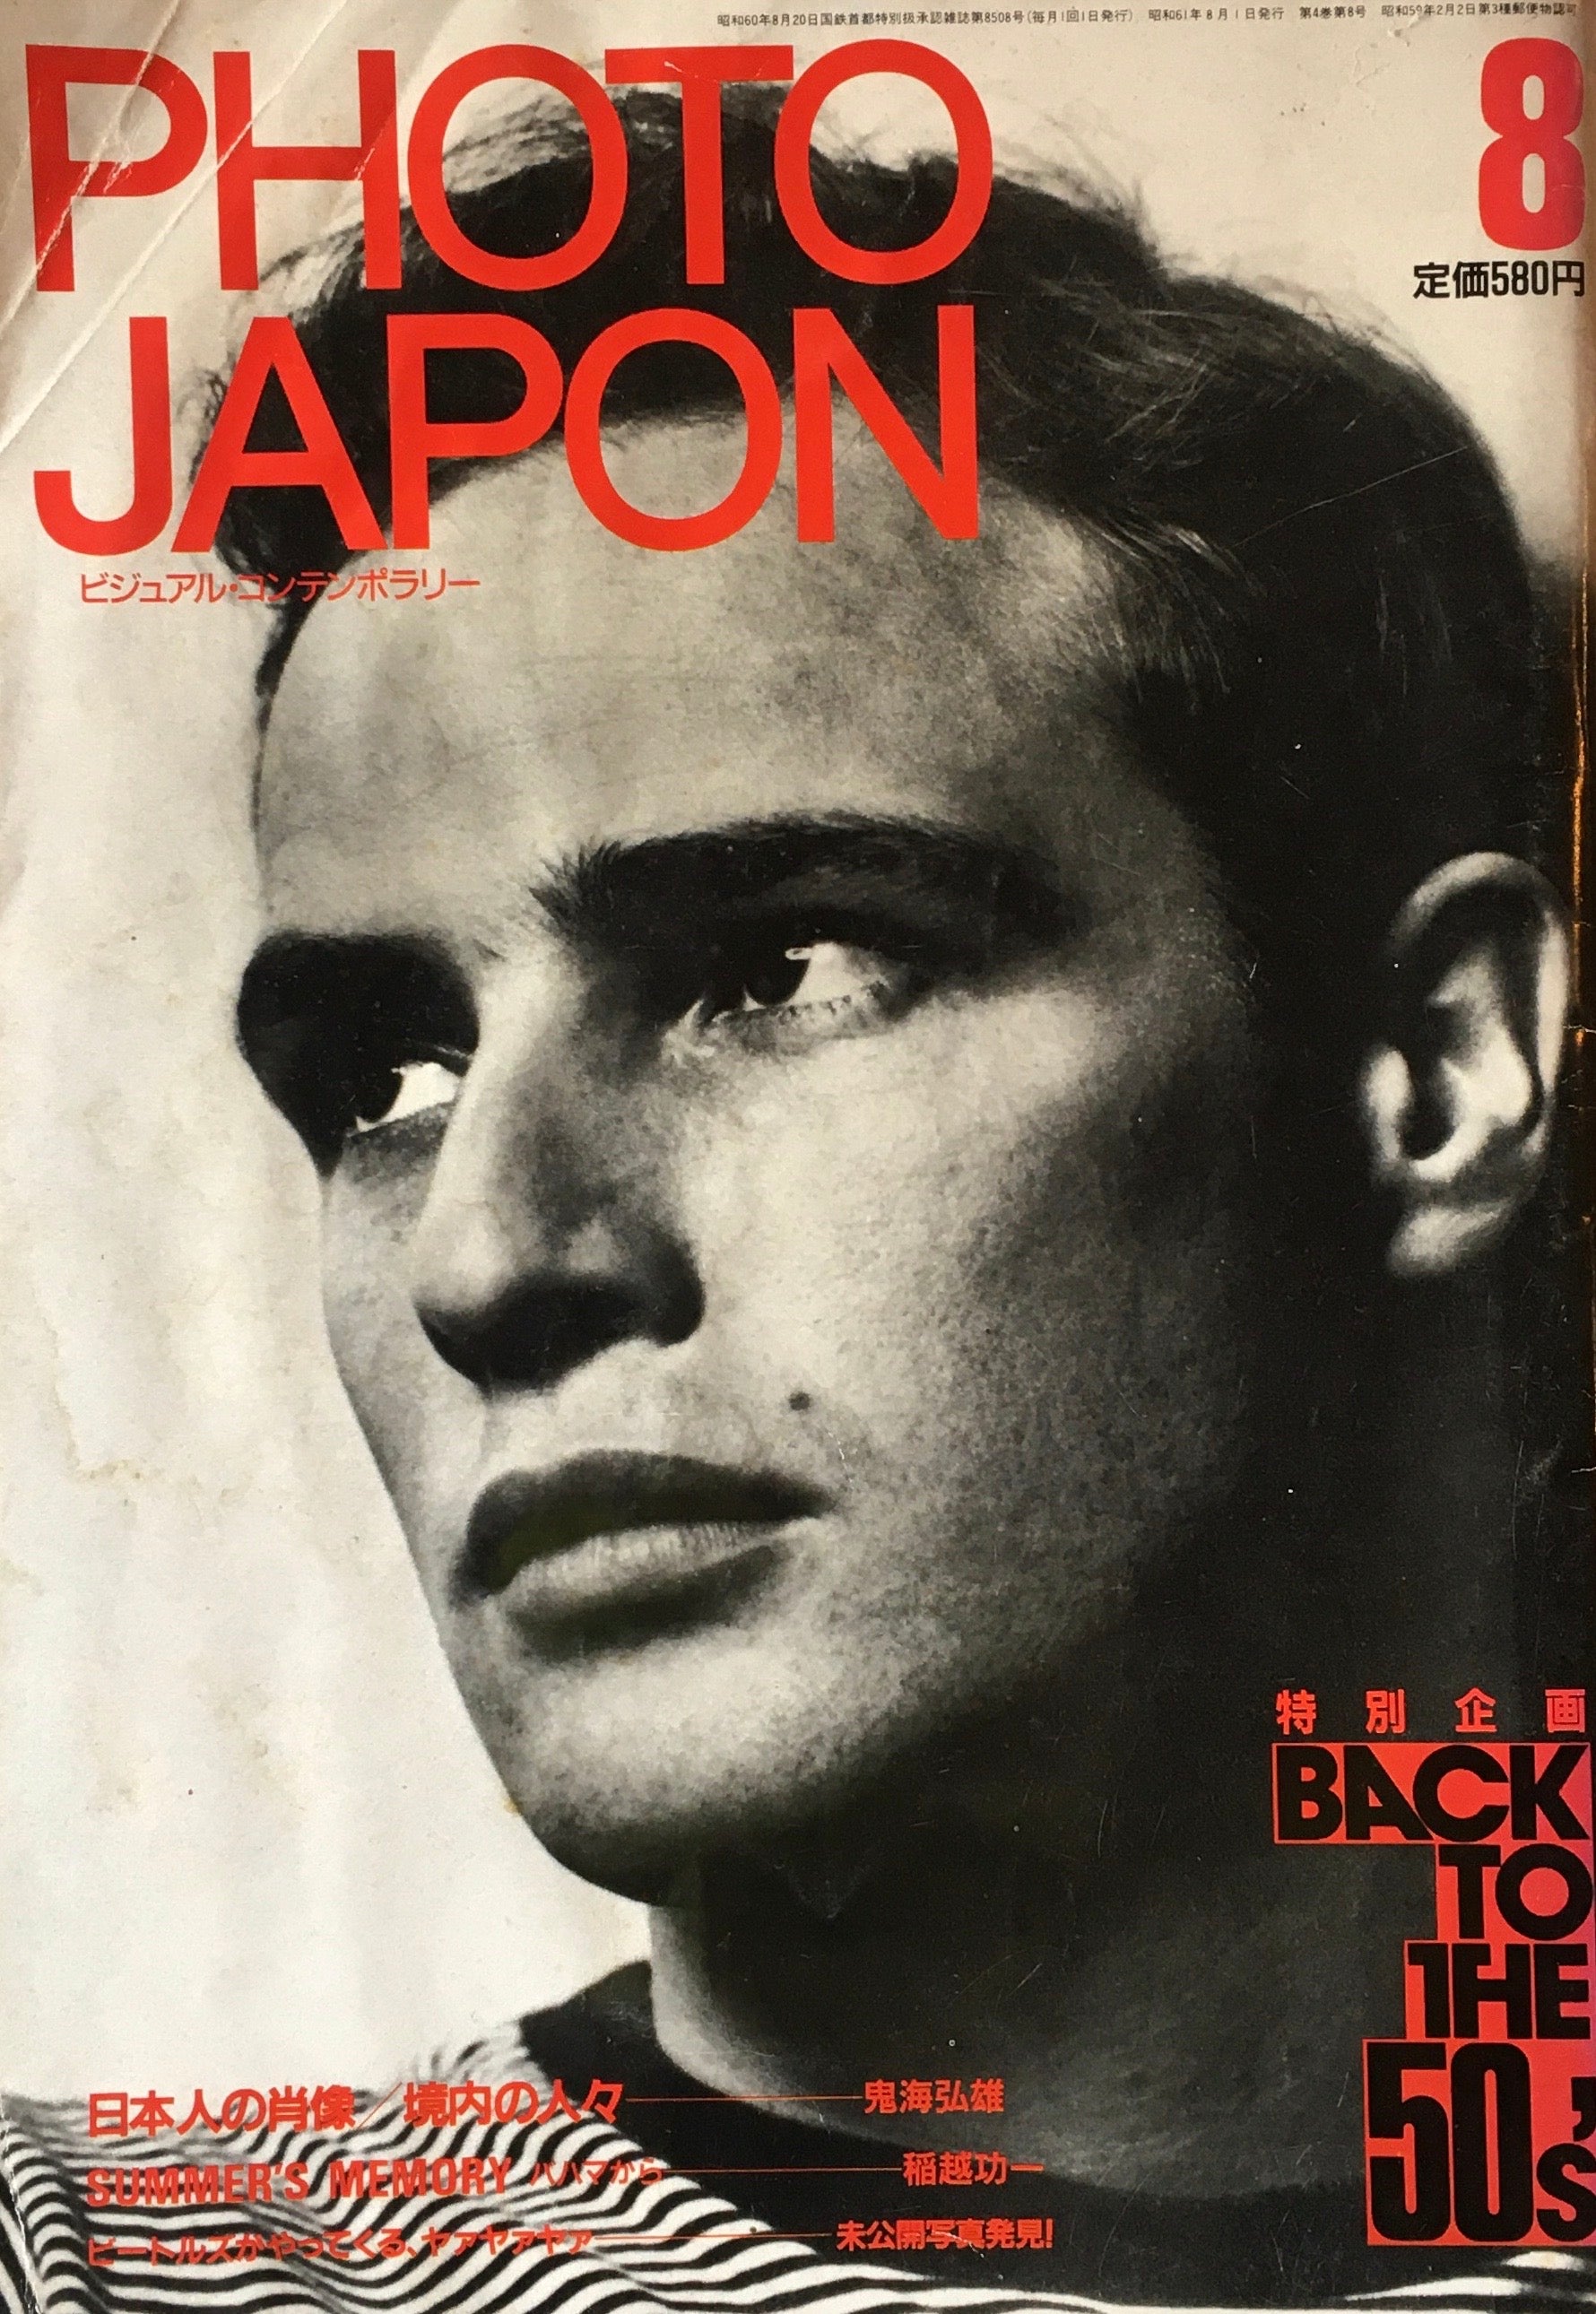 Photo Japon　No.34　1964年8月号　Back to The 50's